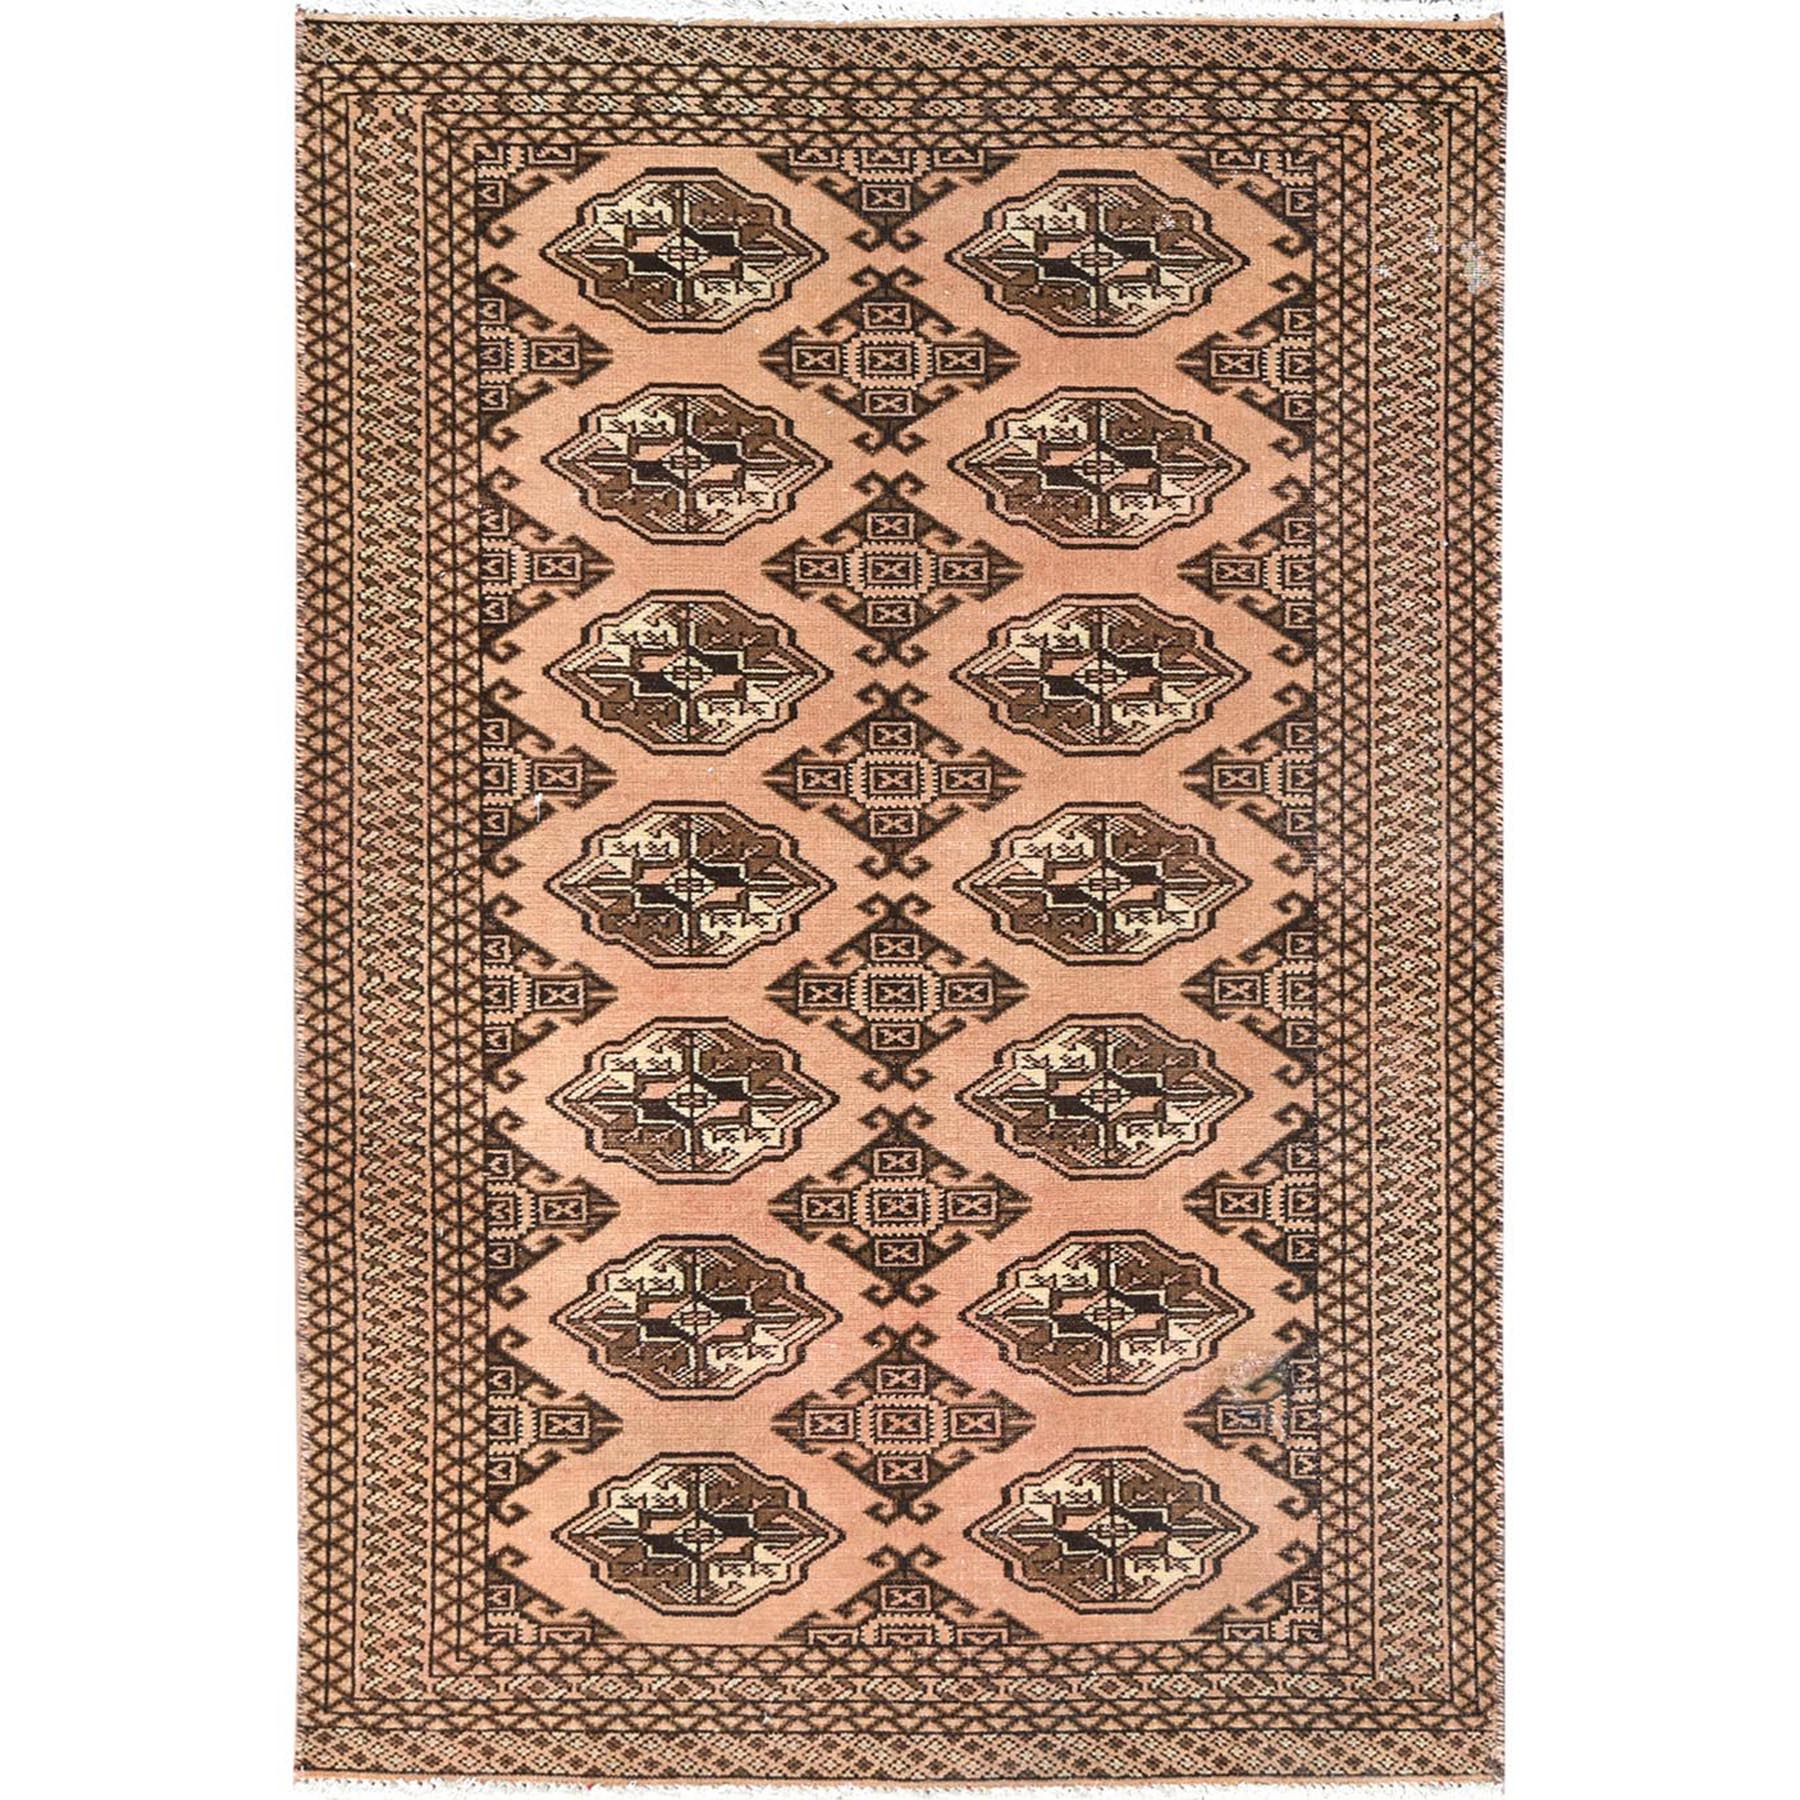  Wool Hand-Knotted Area Rug 3'3